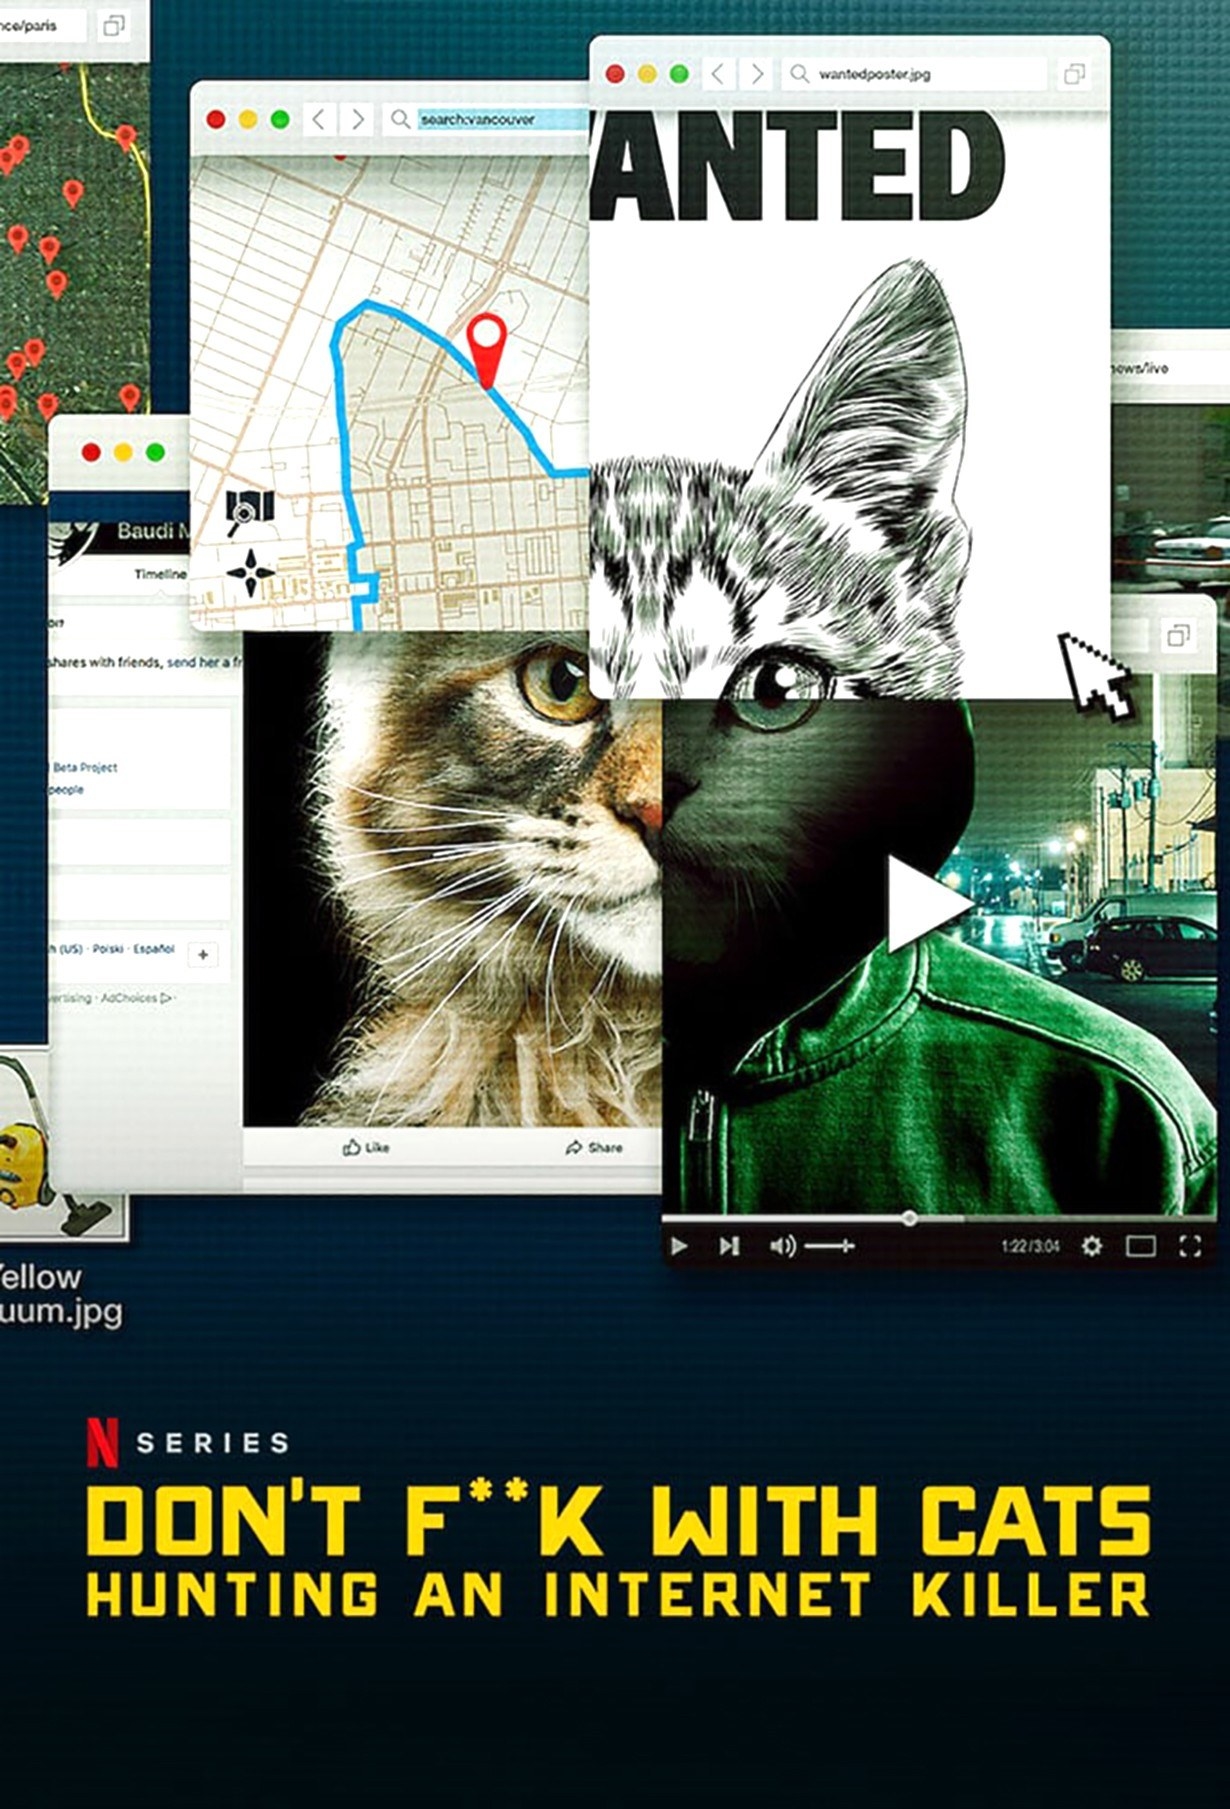 DON&#x27;T F**K WITH CATS: HUNTING AN INTERNET KILLER poster, featuring many cats